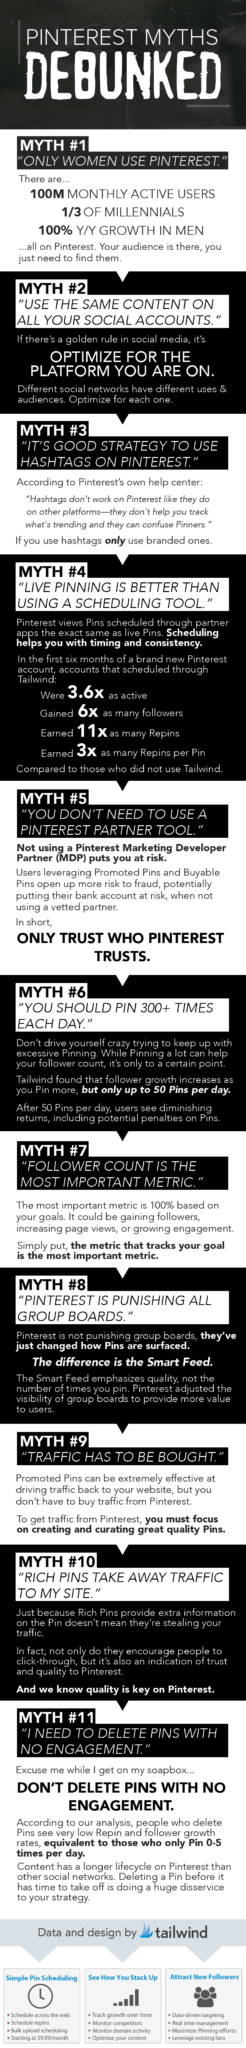 Share this infographic on Pinterest!